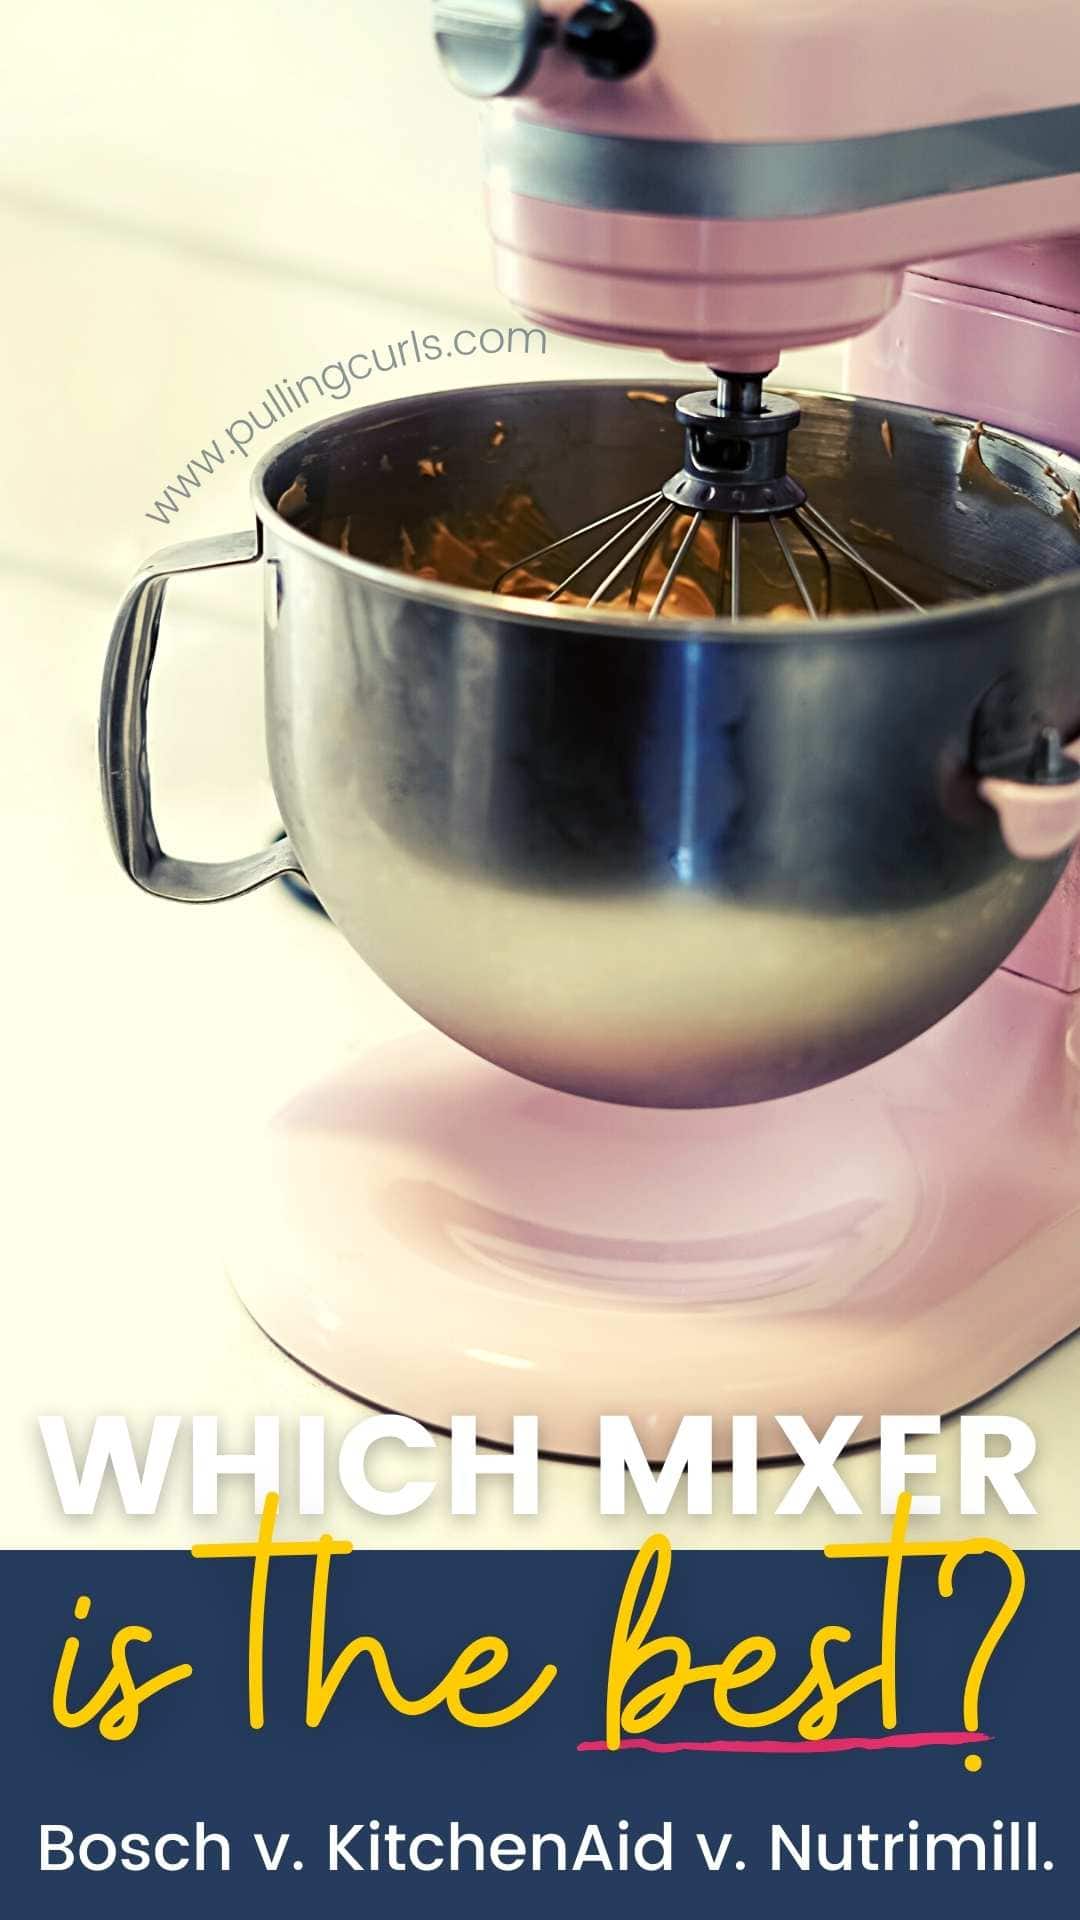 Nutrimill Artiste Mixer vs KitchenAid vs Bosch Universal -- which stand mixer will reign supreme in this in-home review and testing of the more popular stand mixers? via @pullingcurls